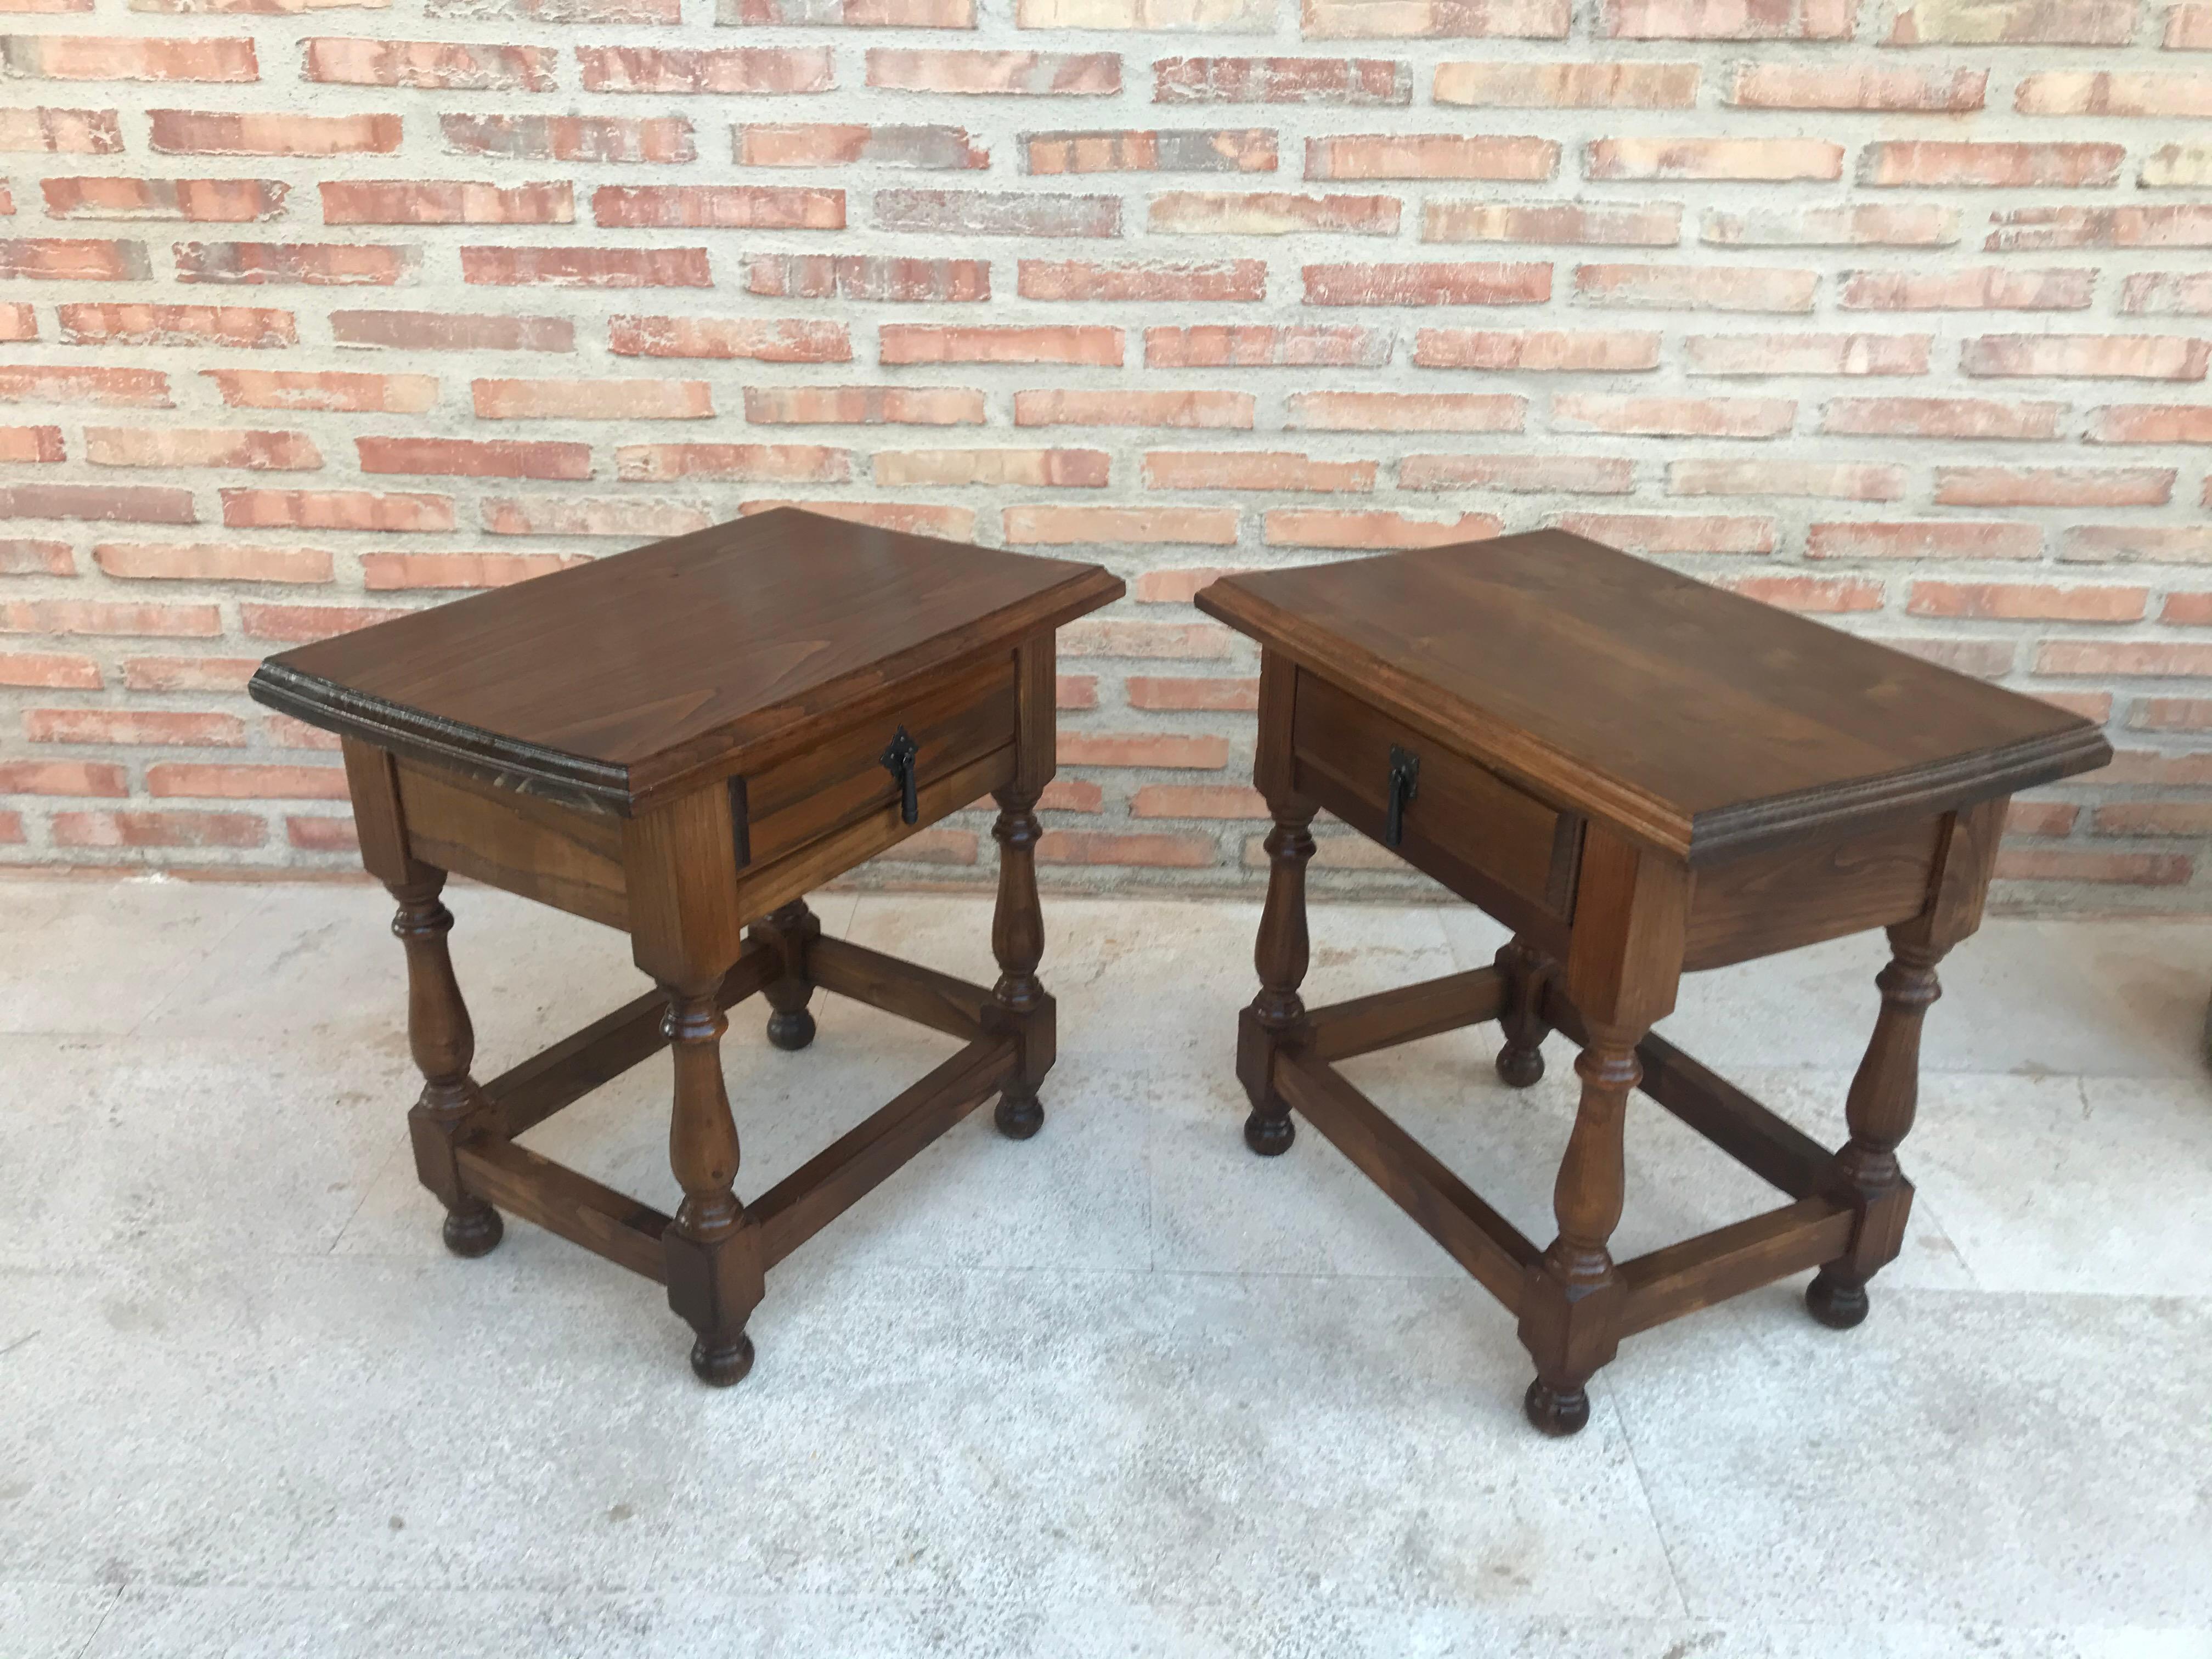 20th century pair of Spanish nightstands with drawer and iron hardware.
Beautiful tables that you can use like a nightstands or side tables, end tables... or table lamp.